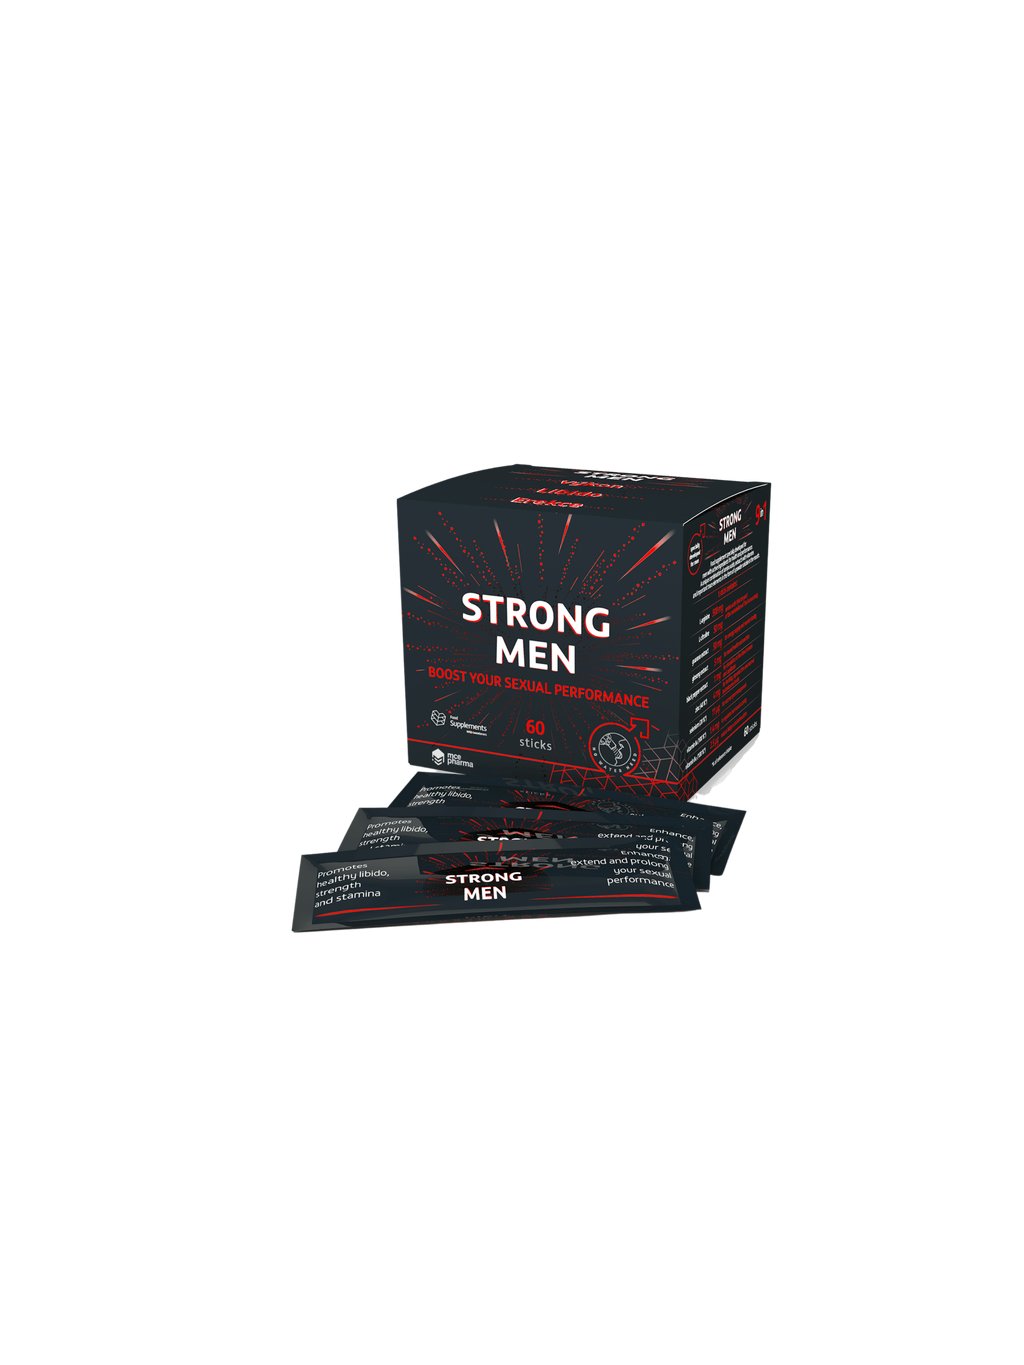 Strong Men – for Male Performance and Health  Supports healthy libido, strength, and endurance.